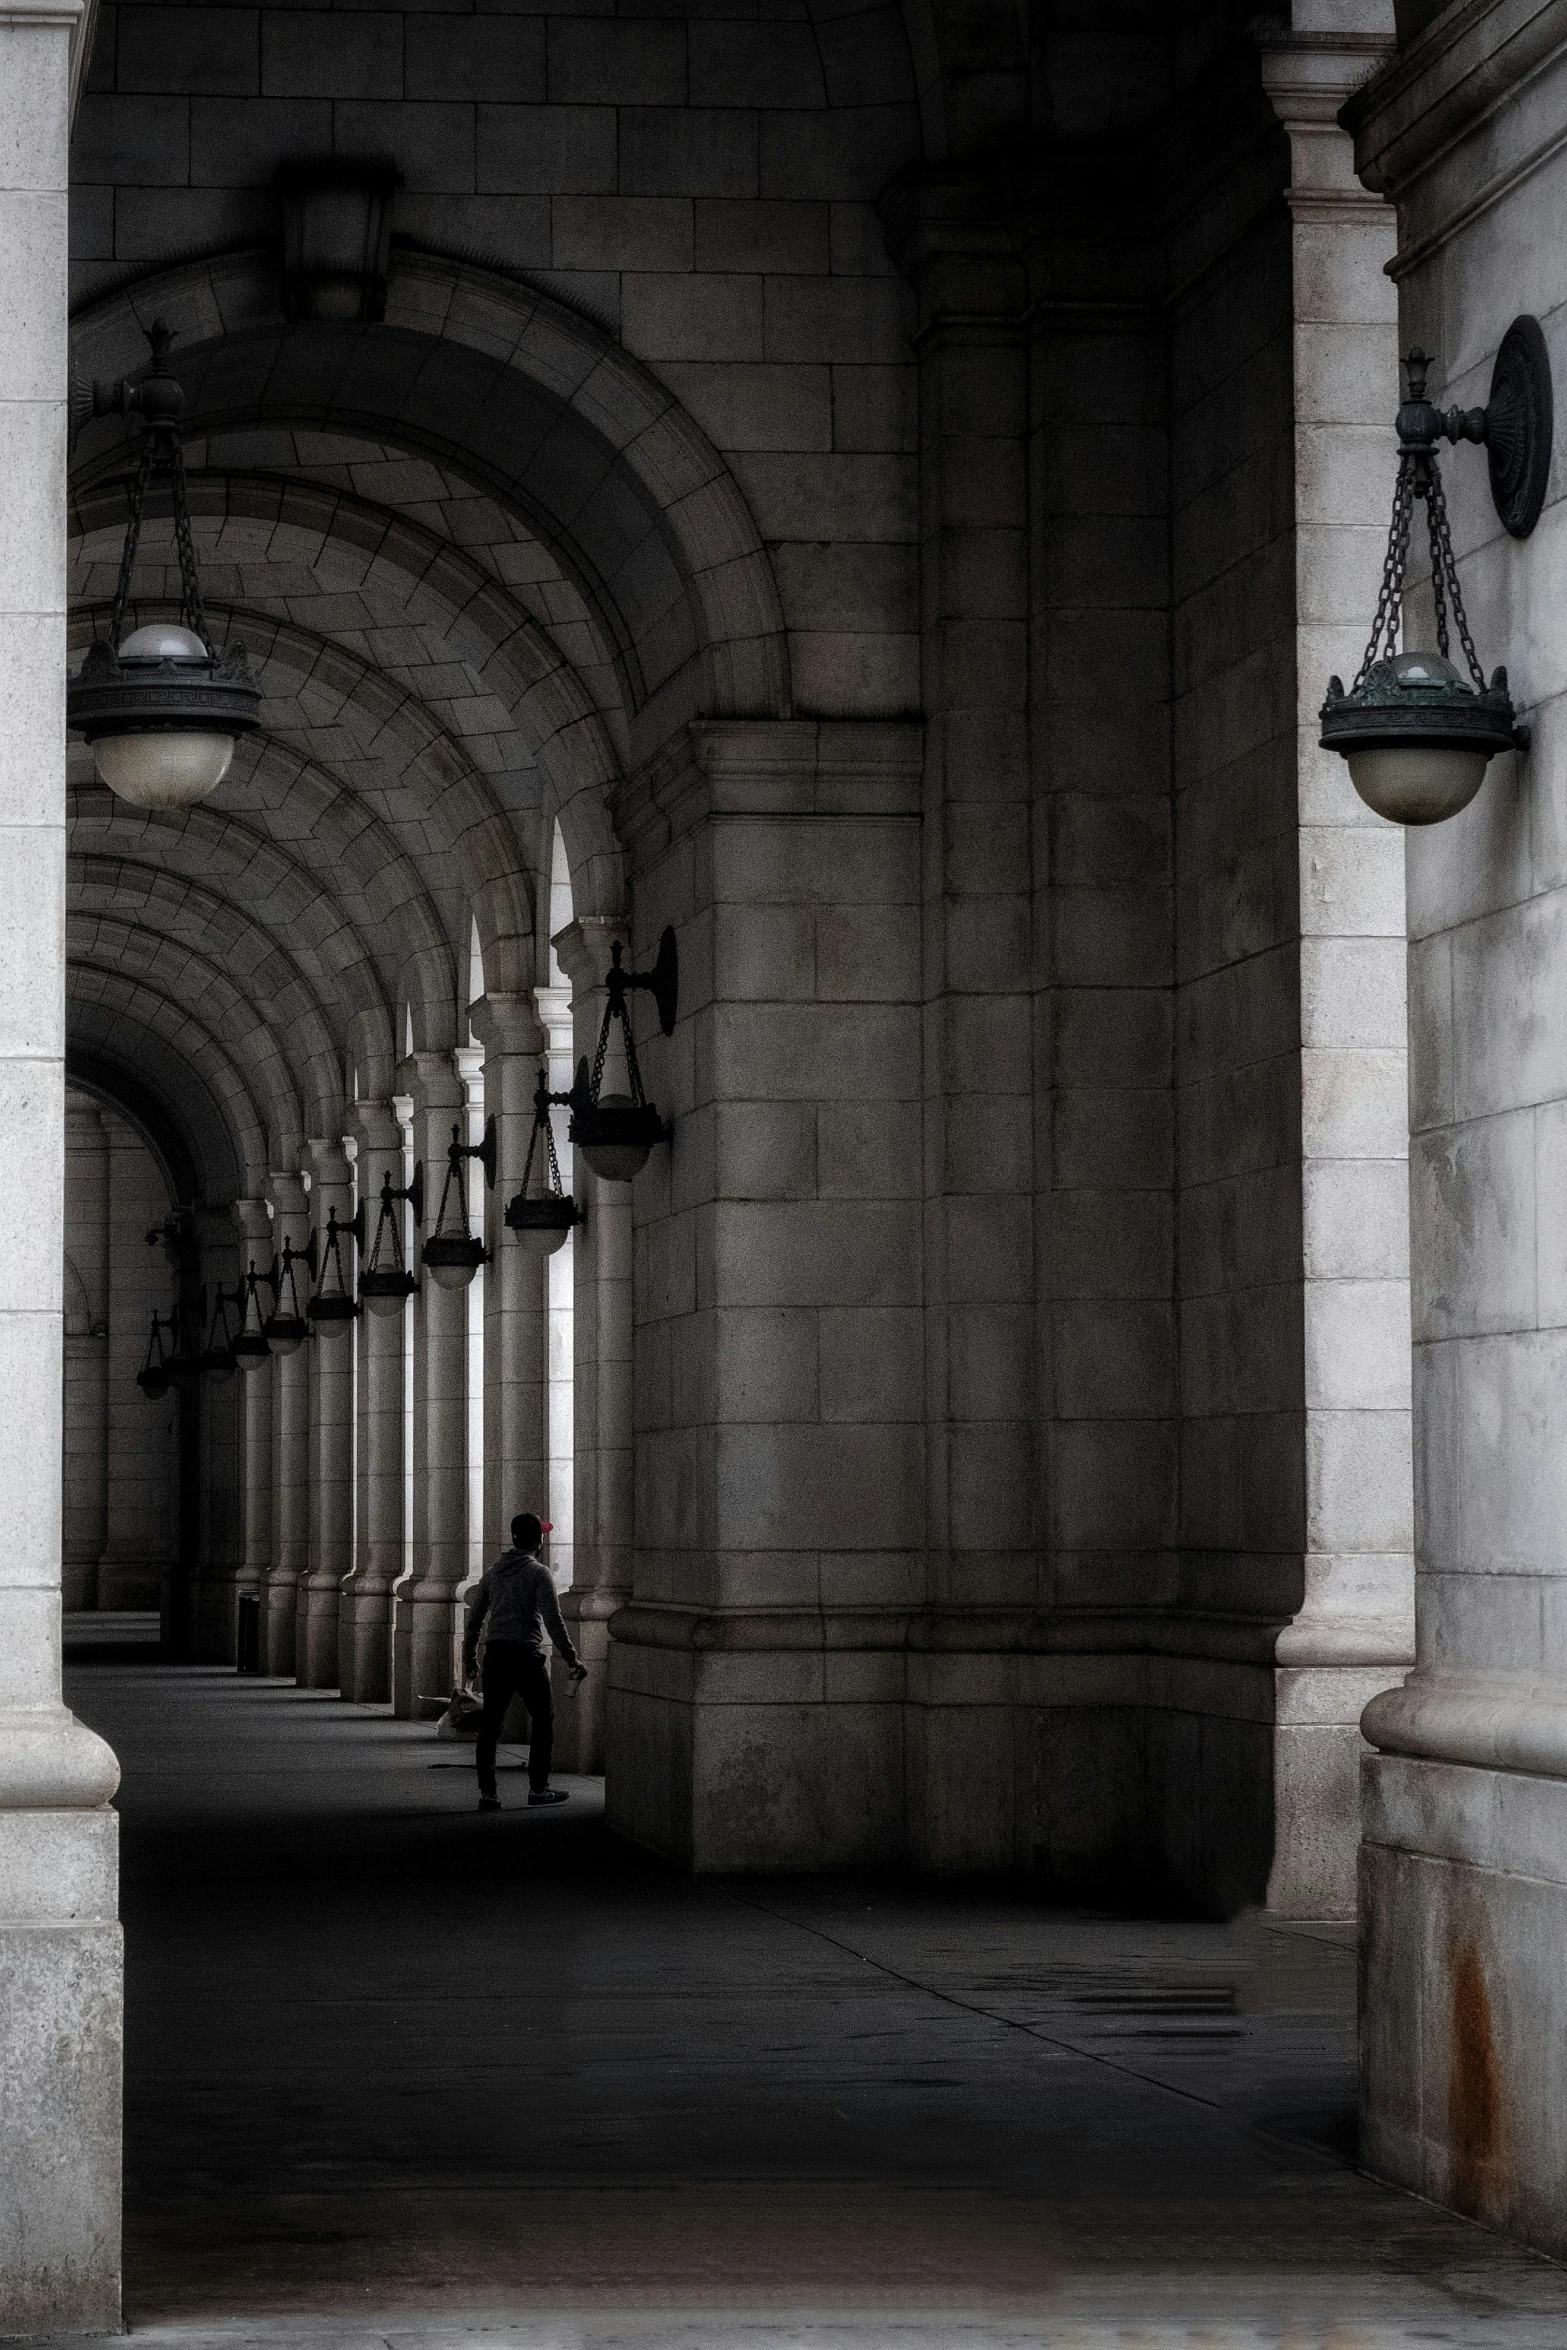 there is a man walking down the hall of an arch